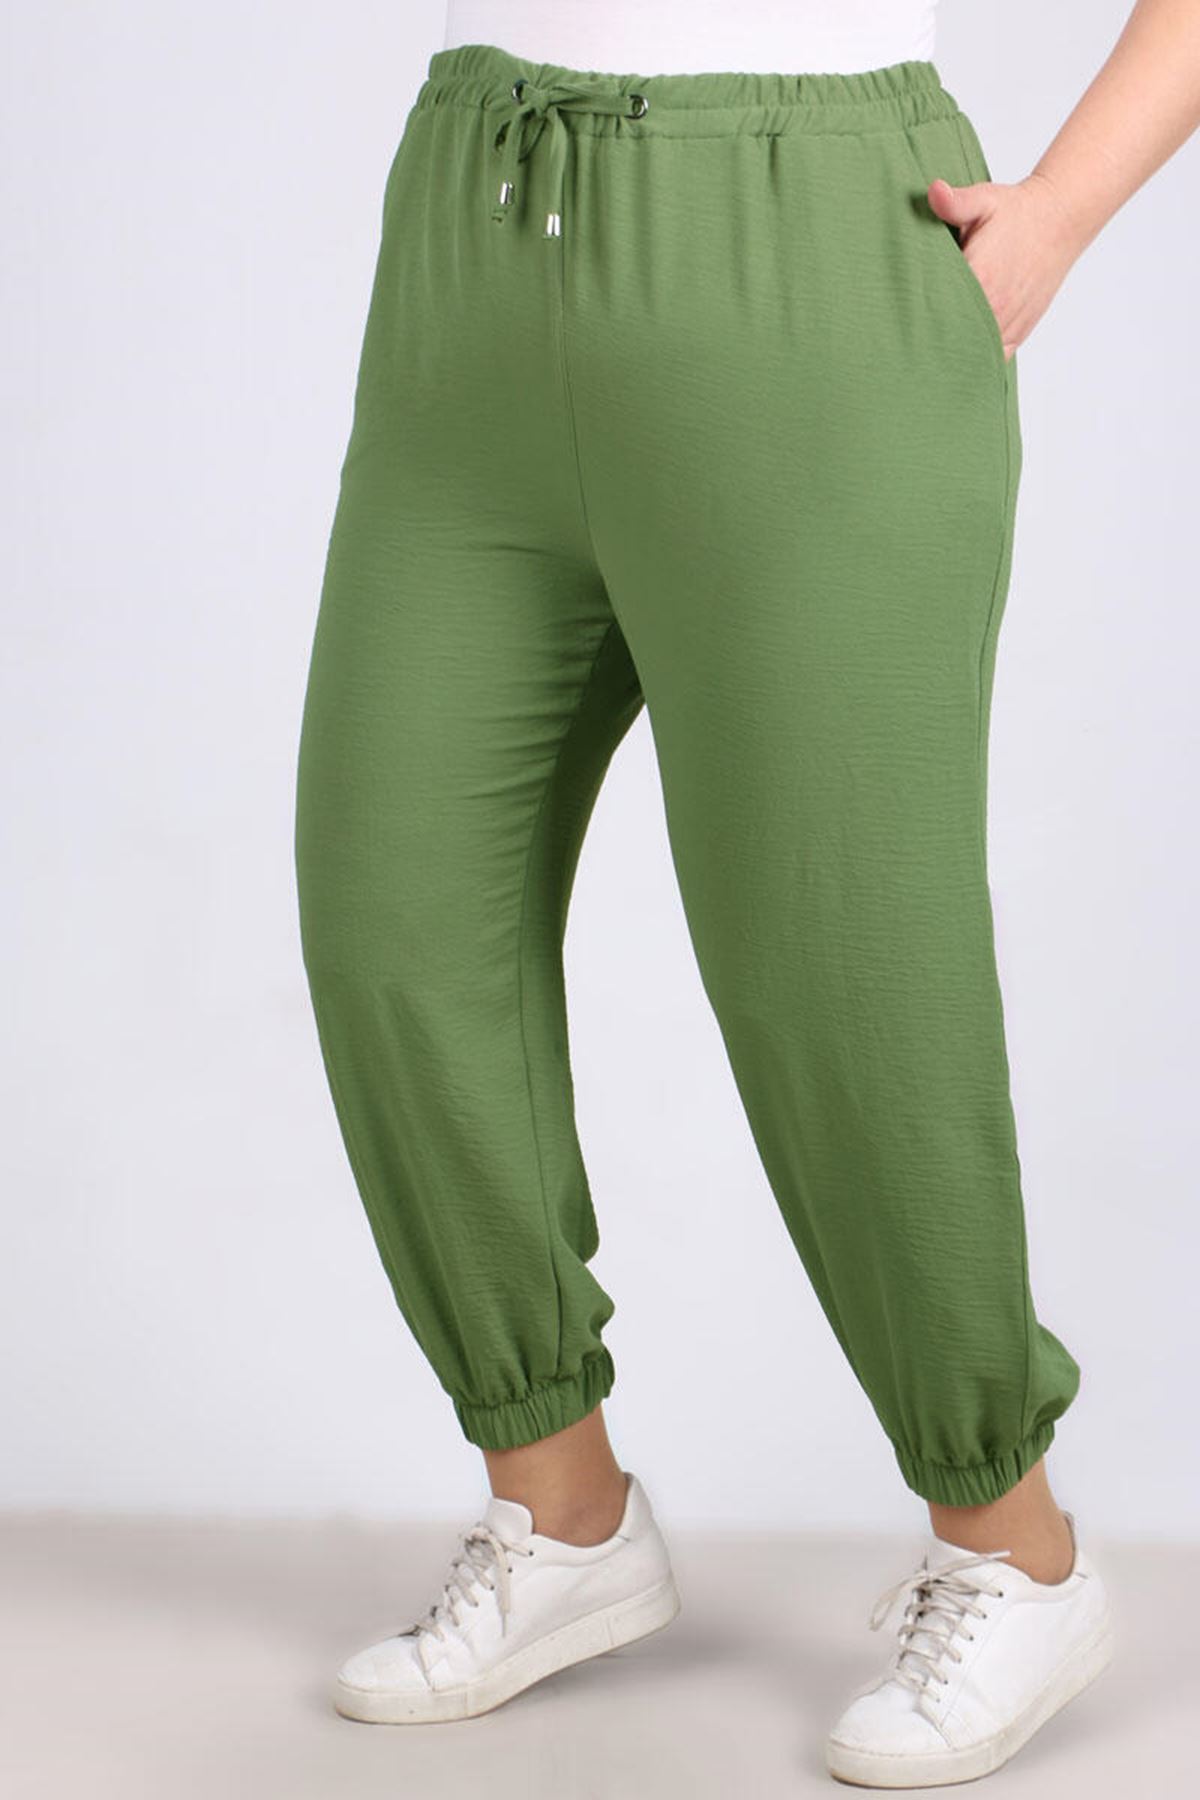 9113 Plus Size Pants with Elastic Waist and Trotters - Khaki